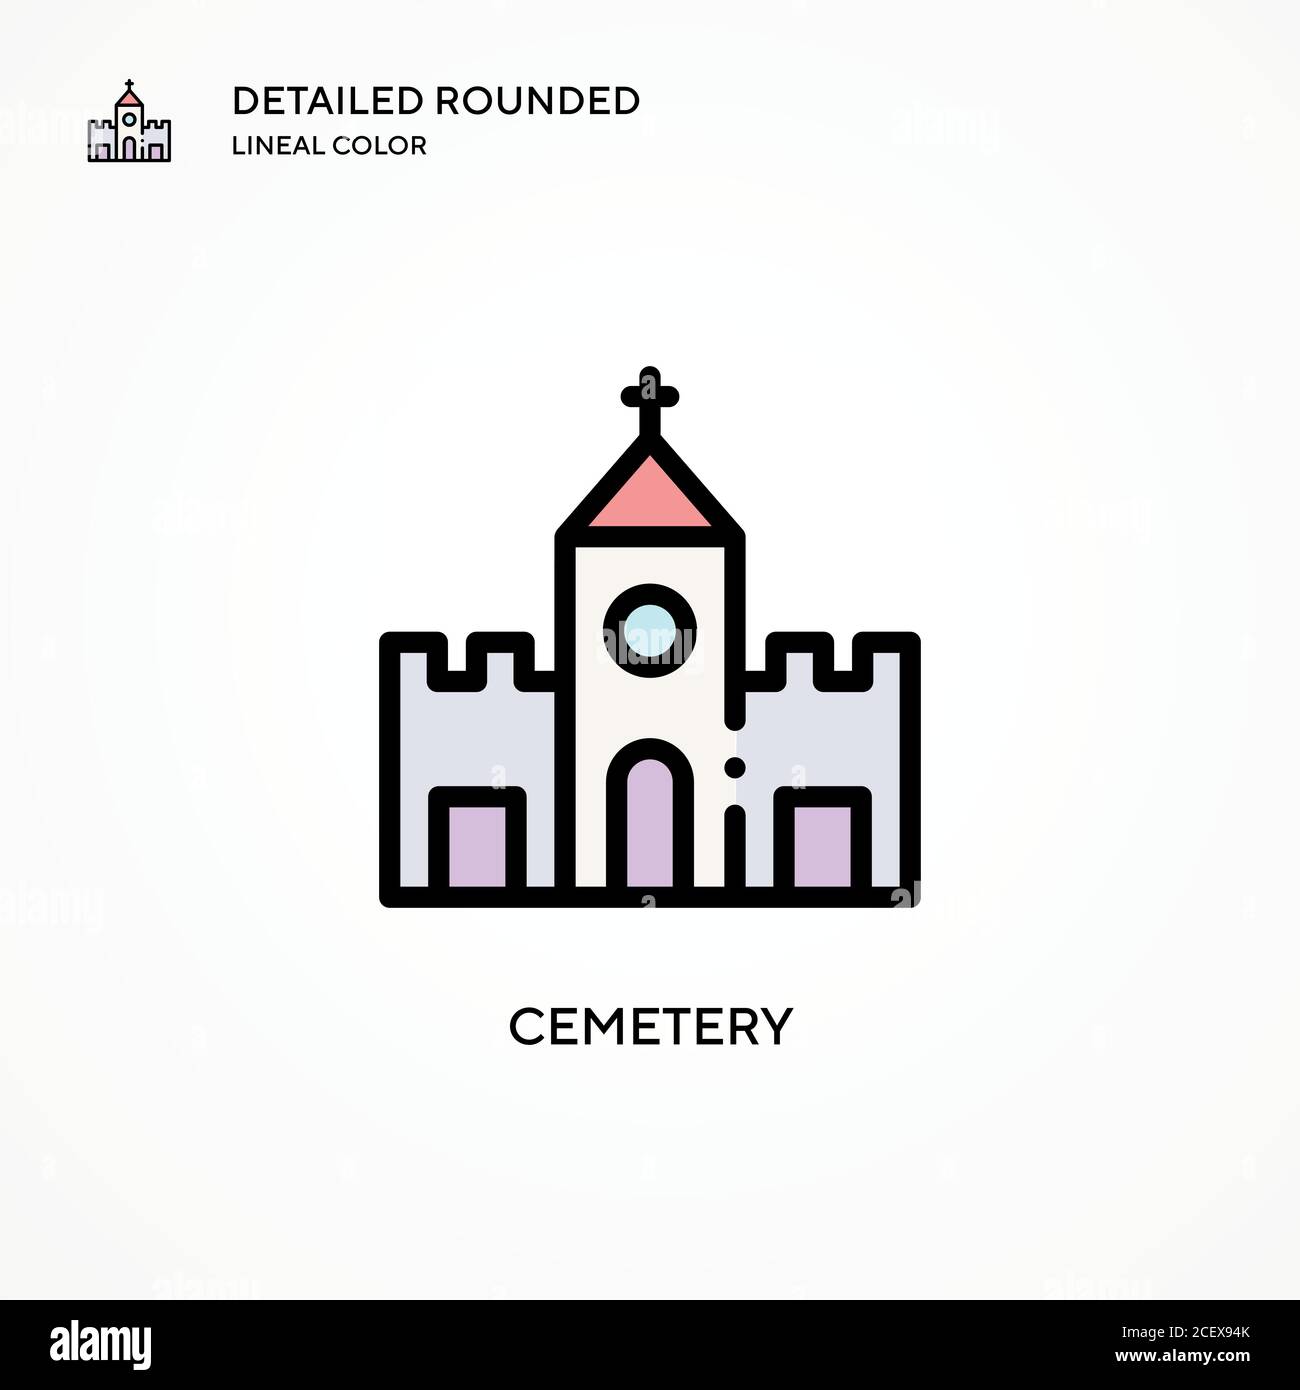 Cemetery vector icon. Modern vector illustration concepts. Easy to edit and customize. Stock Vector